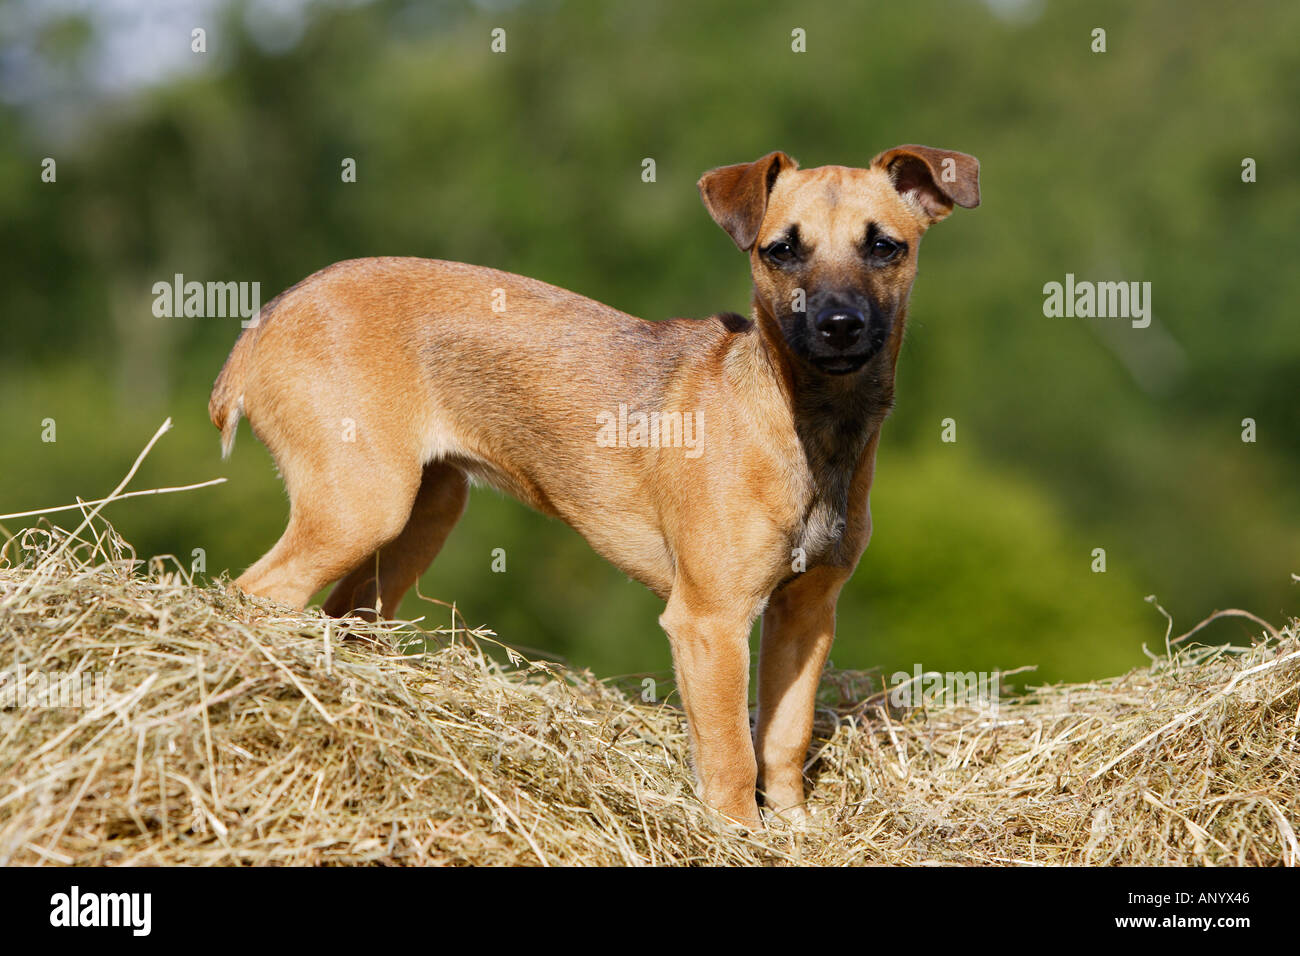 Jack Russell Cross Patterdale Terrier Puppy On A Bed Of Hay England Stock Photo Alamy